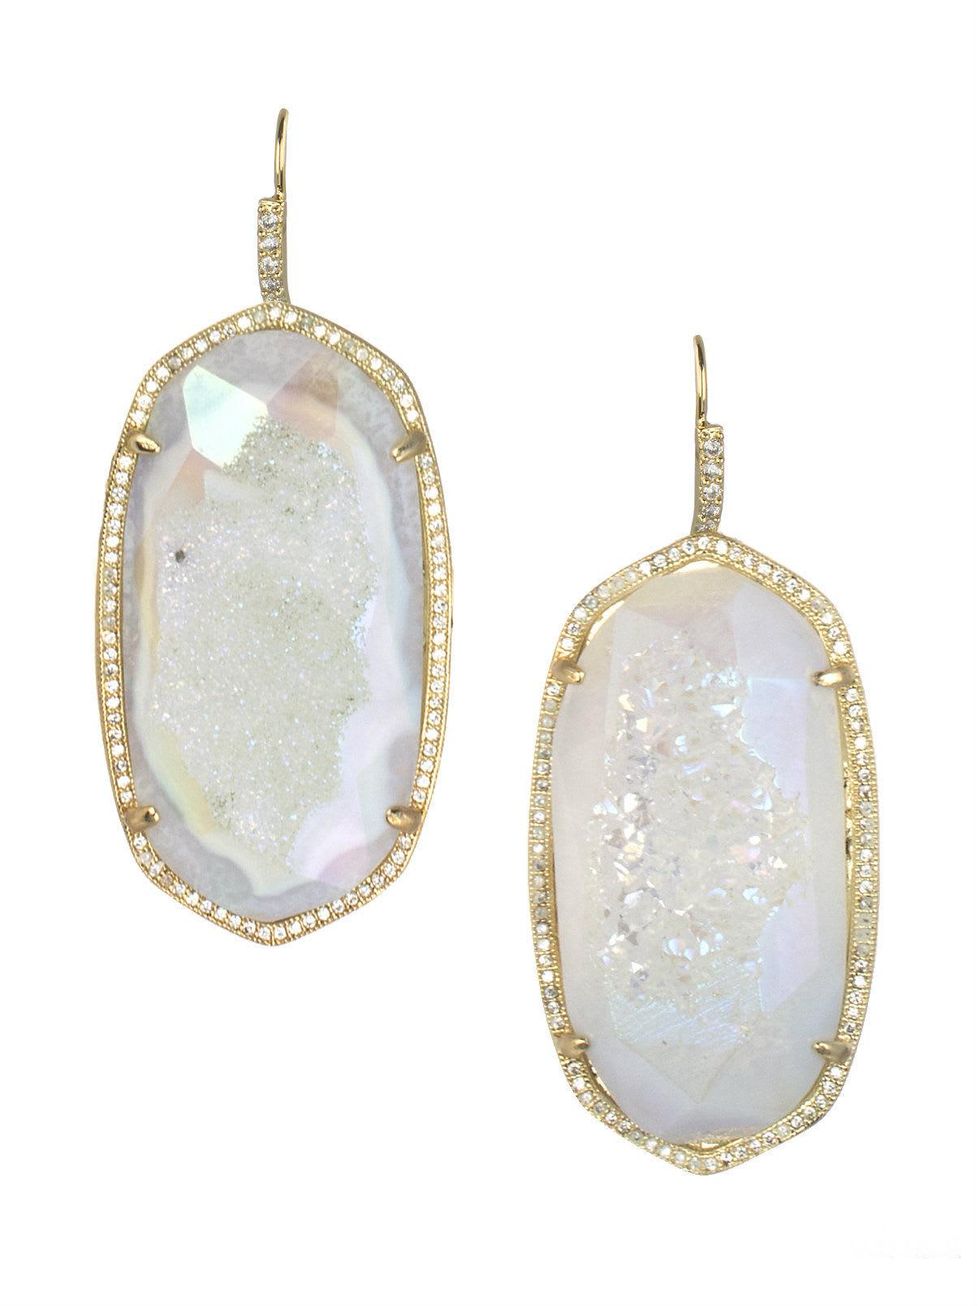 Austin casts its spell on Kendra Scott's ethereal new Luxe jewelry ...